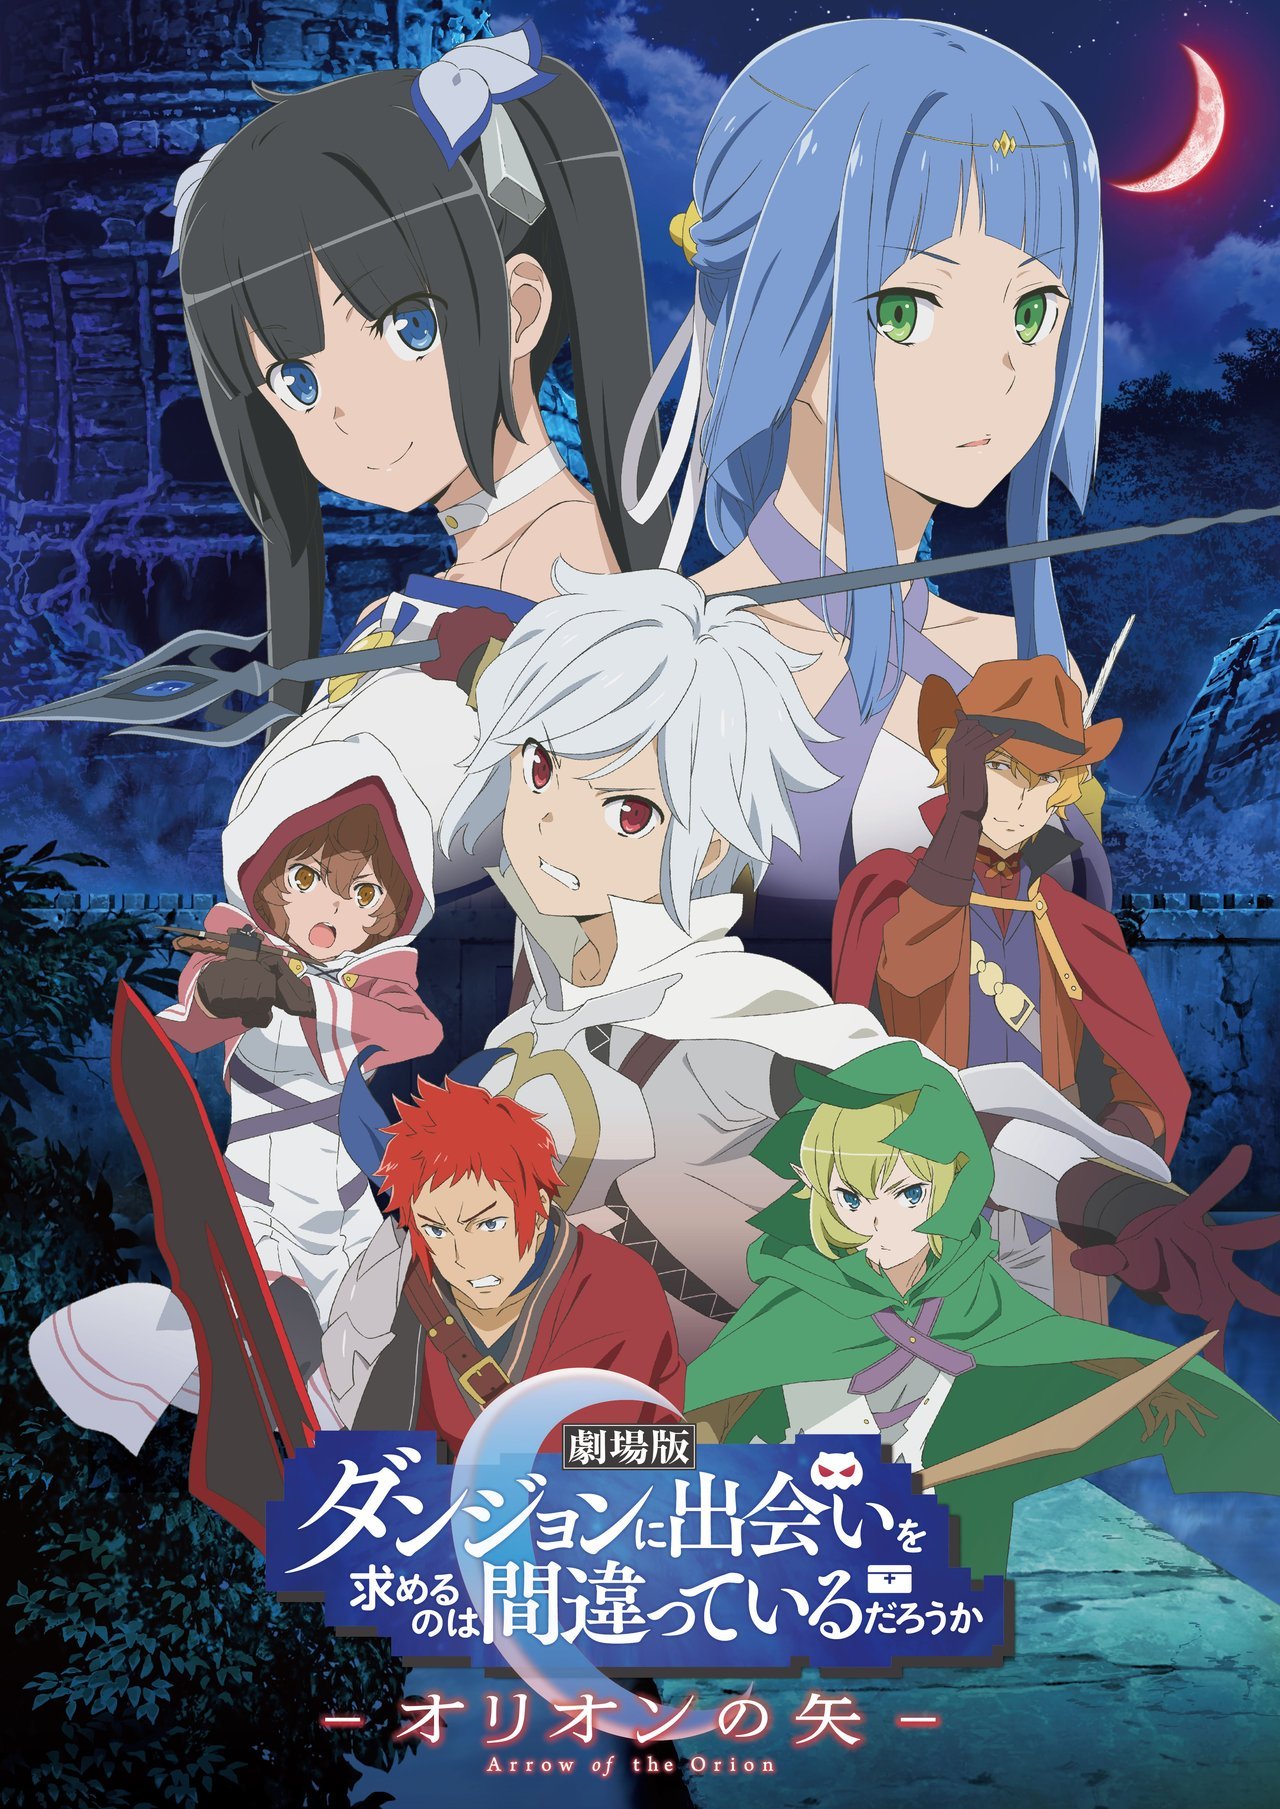 A new poster visual and PV is now available for the upcoming anime film âDanMachi: Arrow of the Orion.â Yuka Iguchiâs next singleãOnaji Sora no Shita deãwill be used as the main theme song. The movie will premiere in Japanese theaters on February...